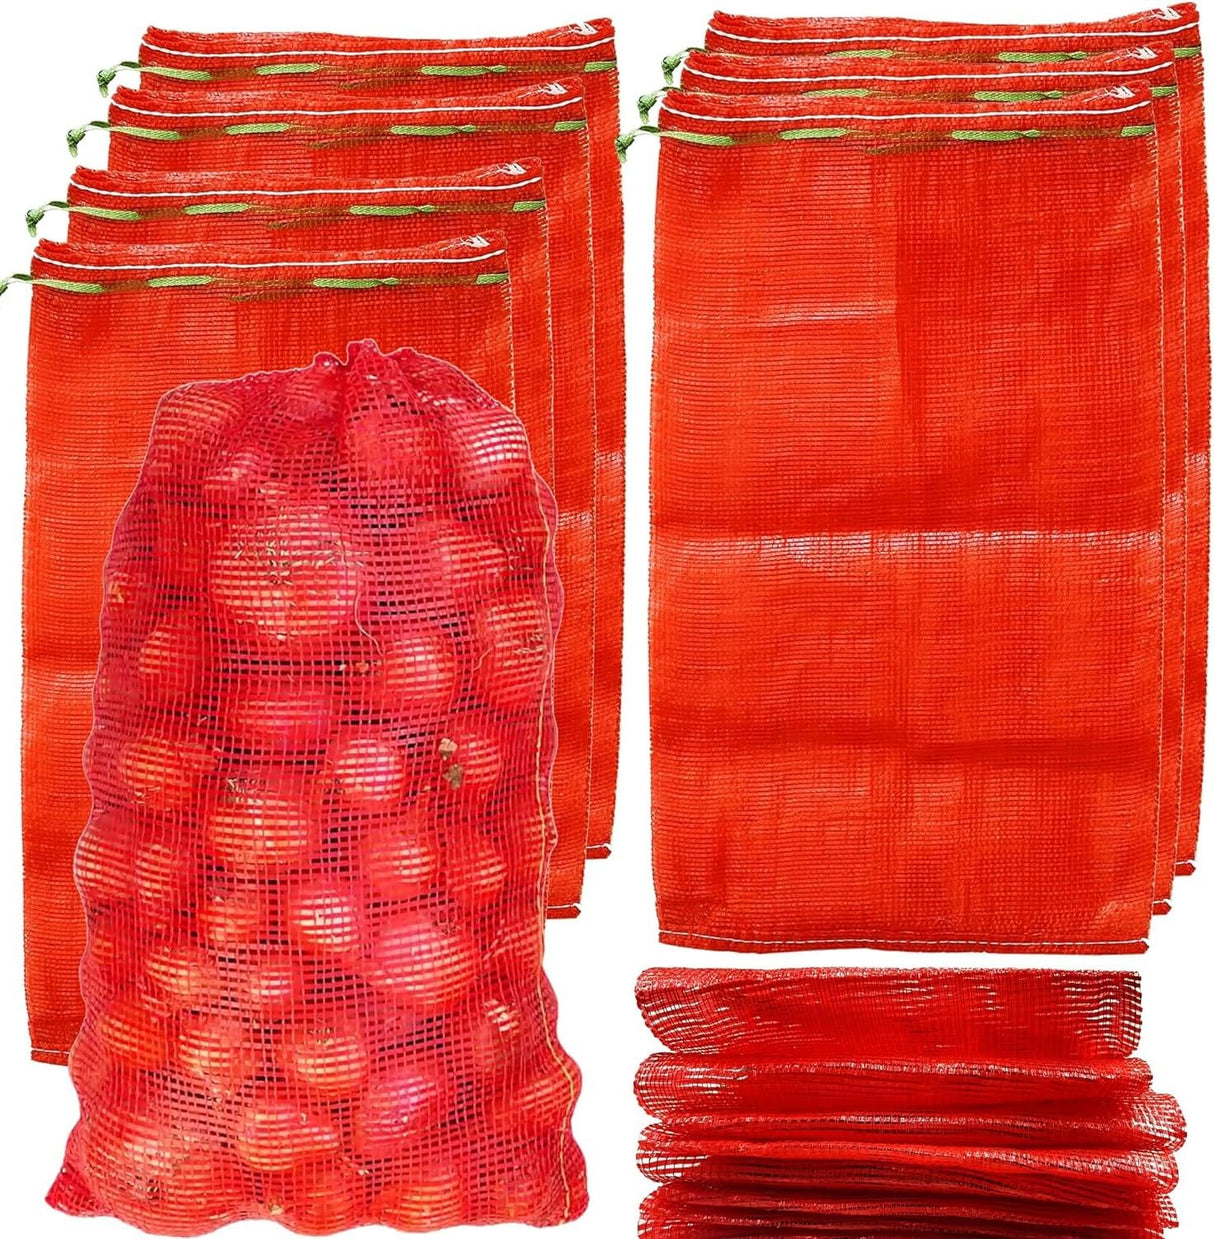 SINGHAL Leno Mesh Storage Produce Bags Reusable for Vegetable Storage Bags Onion Storage Washable Net Bags (20x28 Inch - Peach, 50)